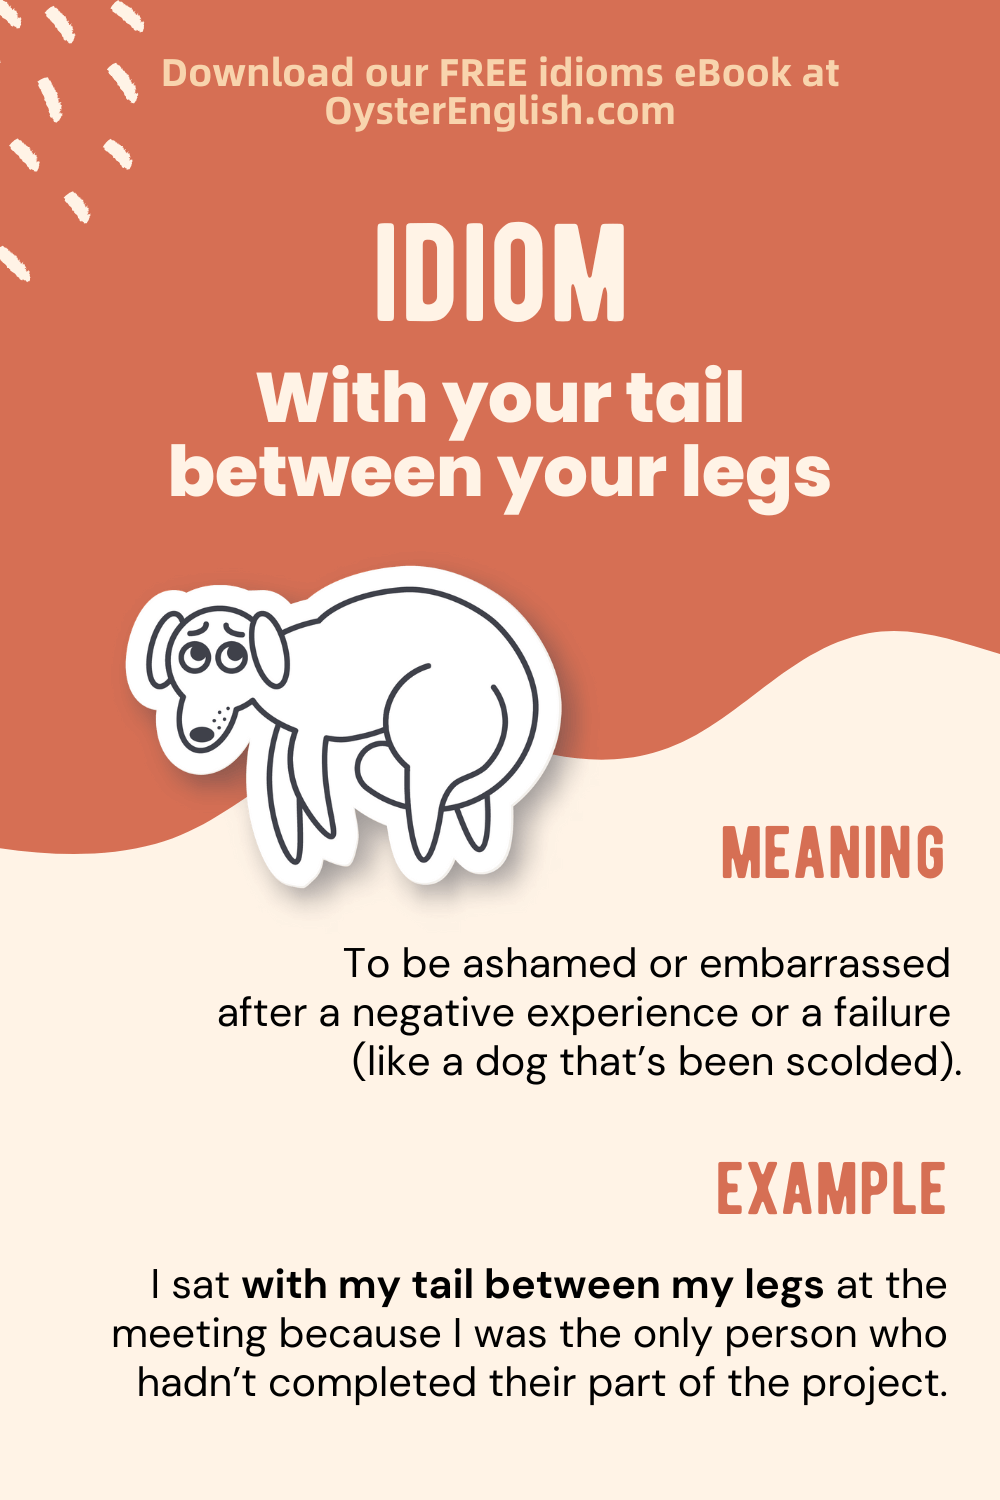 https://www.oysterenglish.com/images/idiom-with-your-tail-between-your-legs-OysterEnglish.com.png